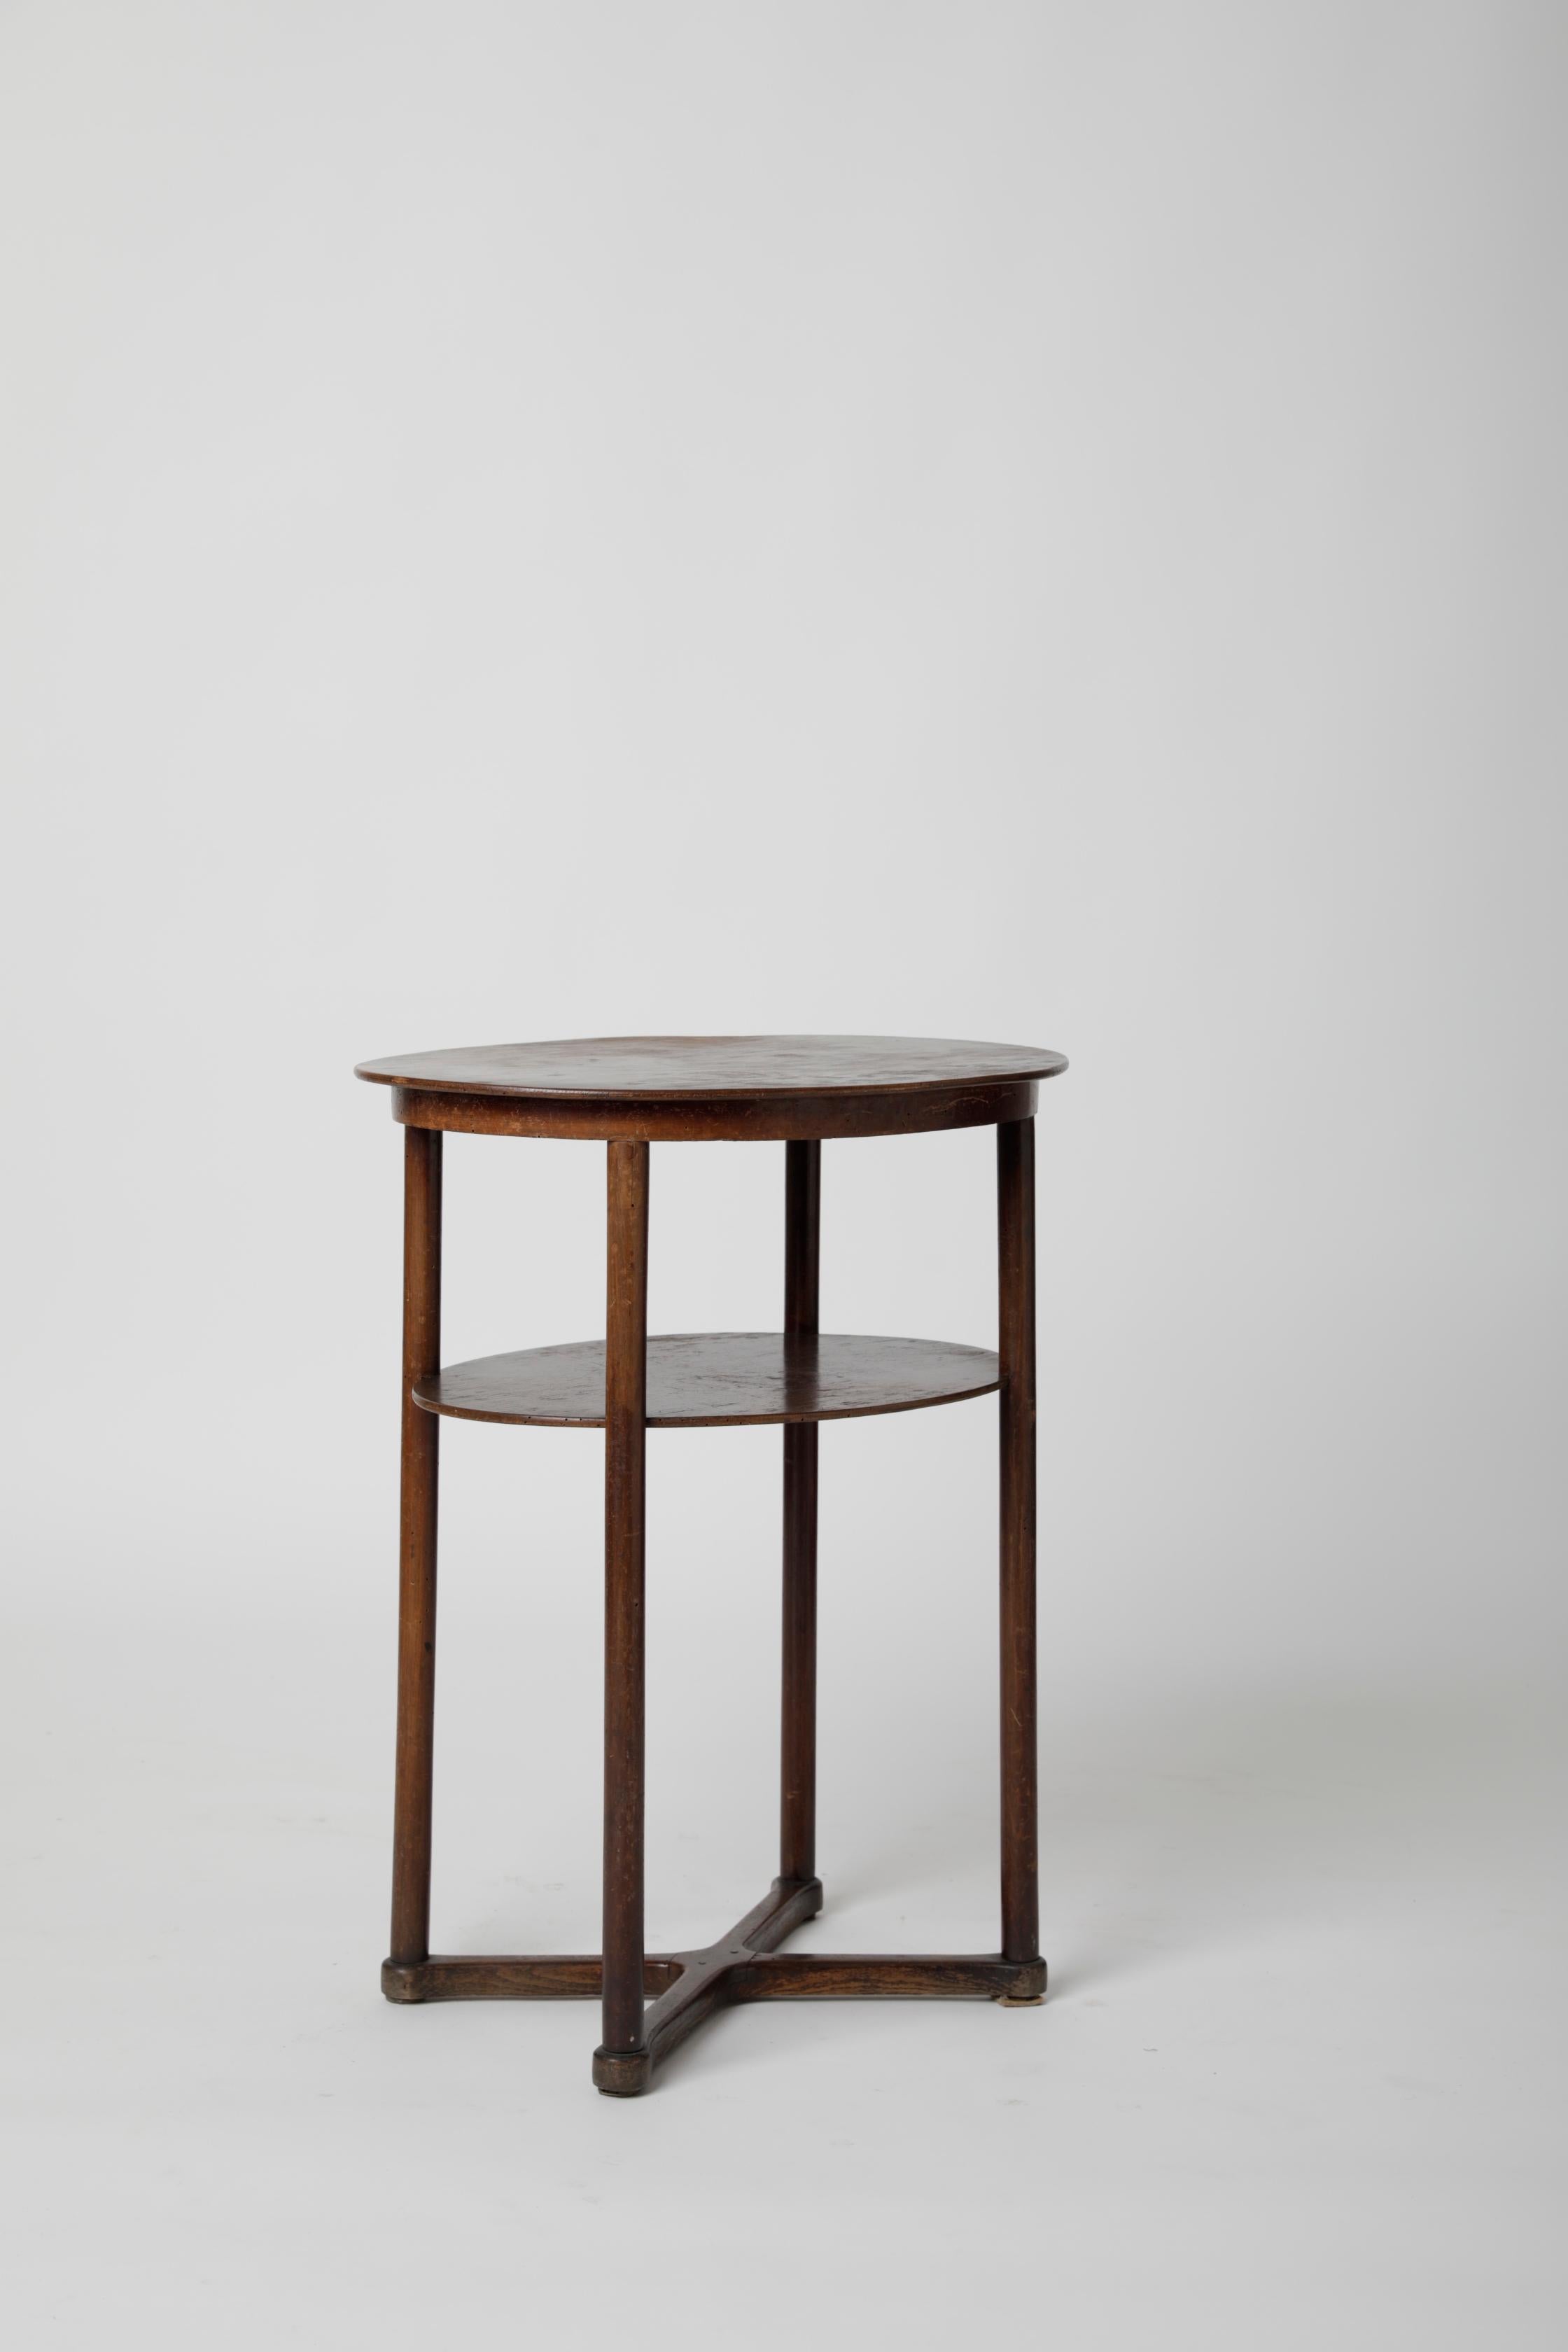 Bentwood side table by Josef Hoffmann, 1905 circa. Designed by the great Austrian designer and also founder of the famous 